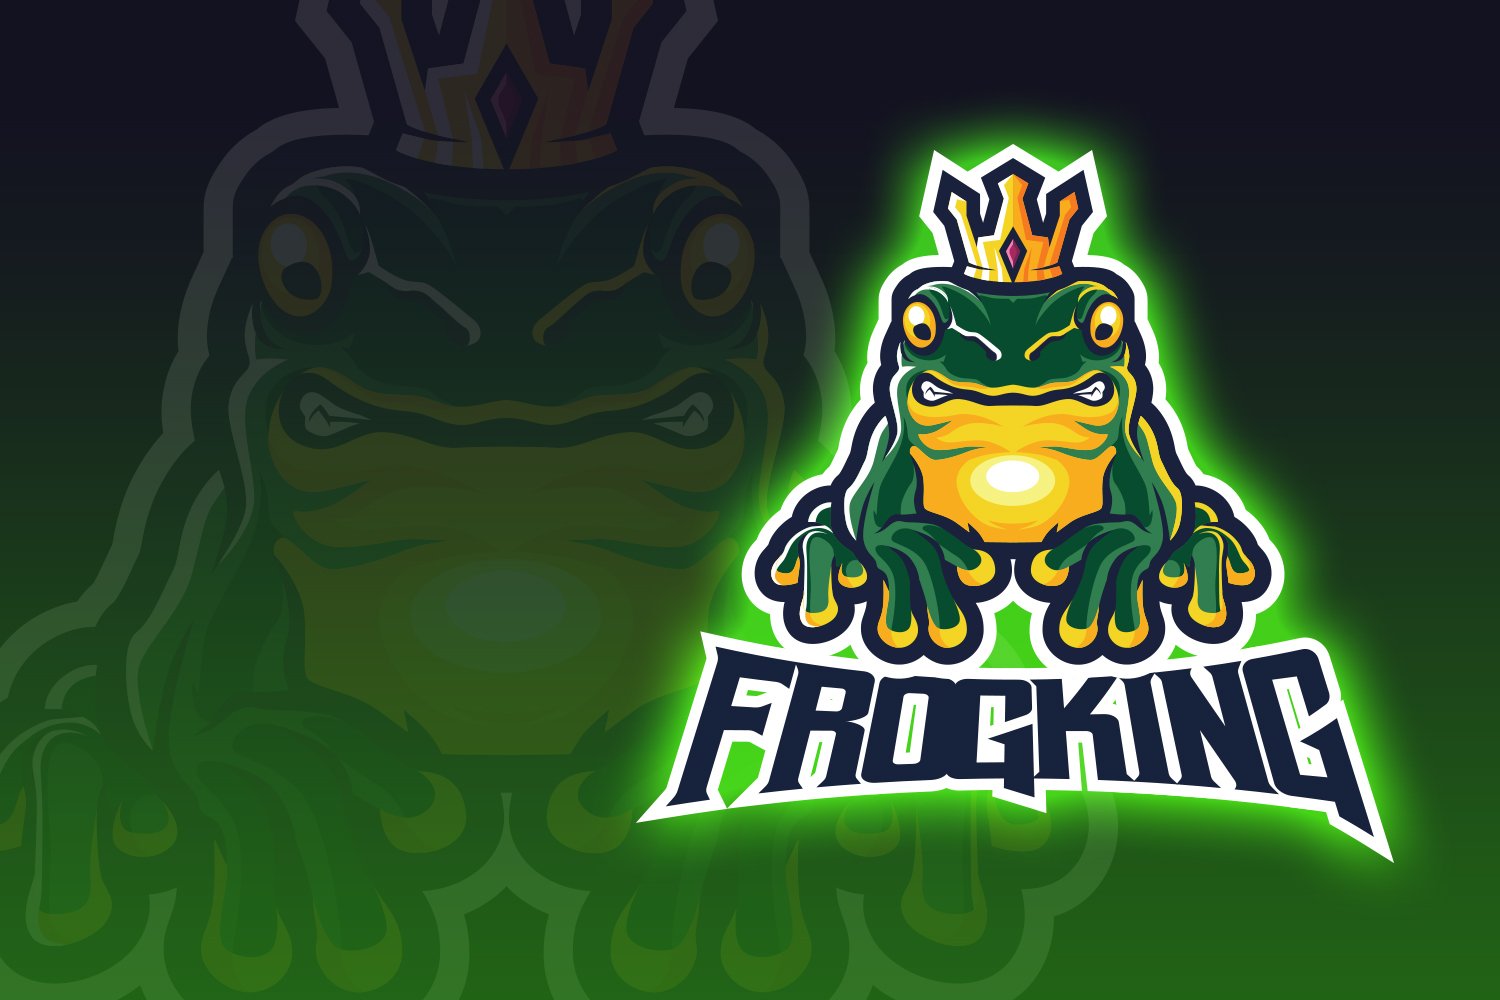 So angry king frog in a deep green color.